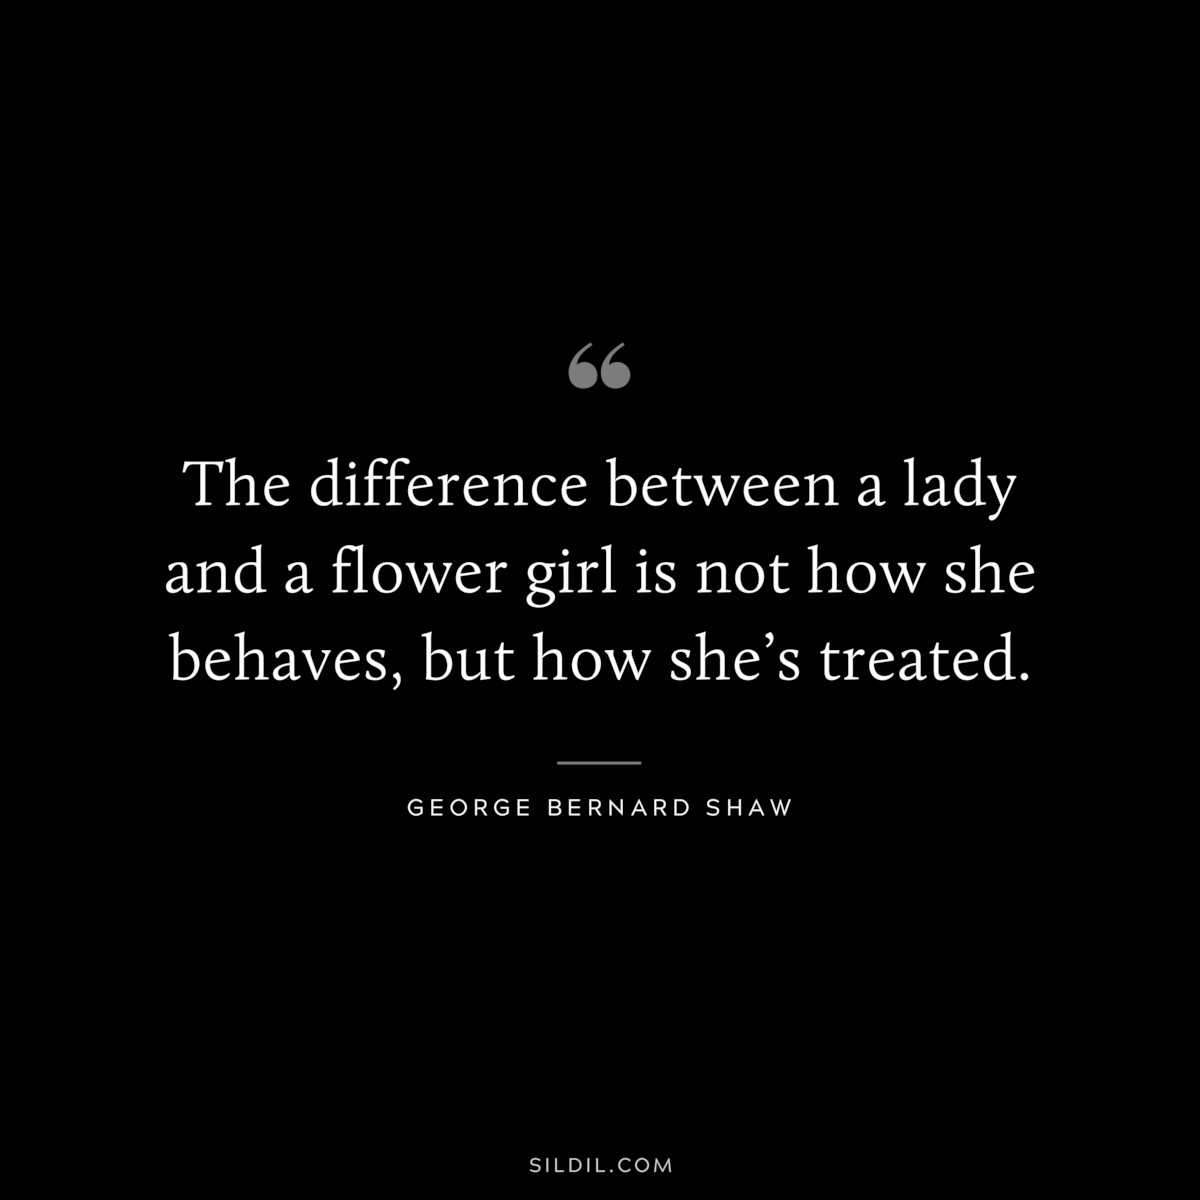 The difference between a lady and a flower girl is not how she behaves, but how she’s treated. ― George Bernard Shaw